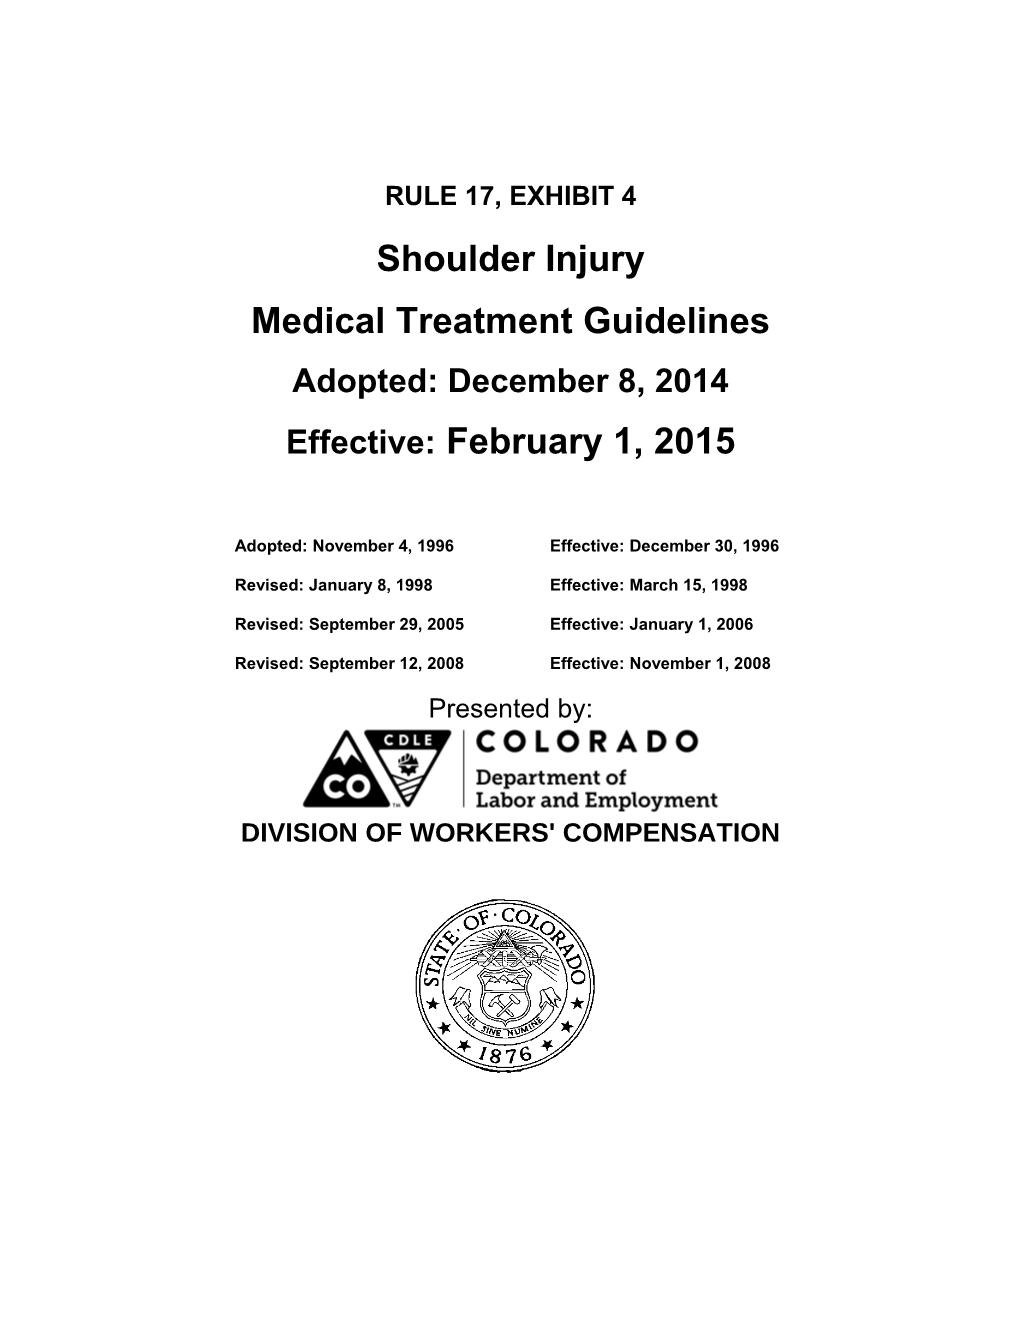 Medical Treatment Guidelines